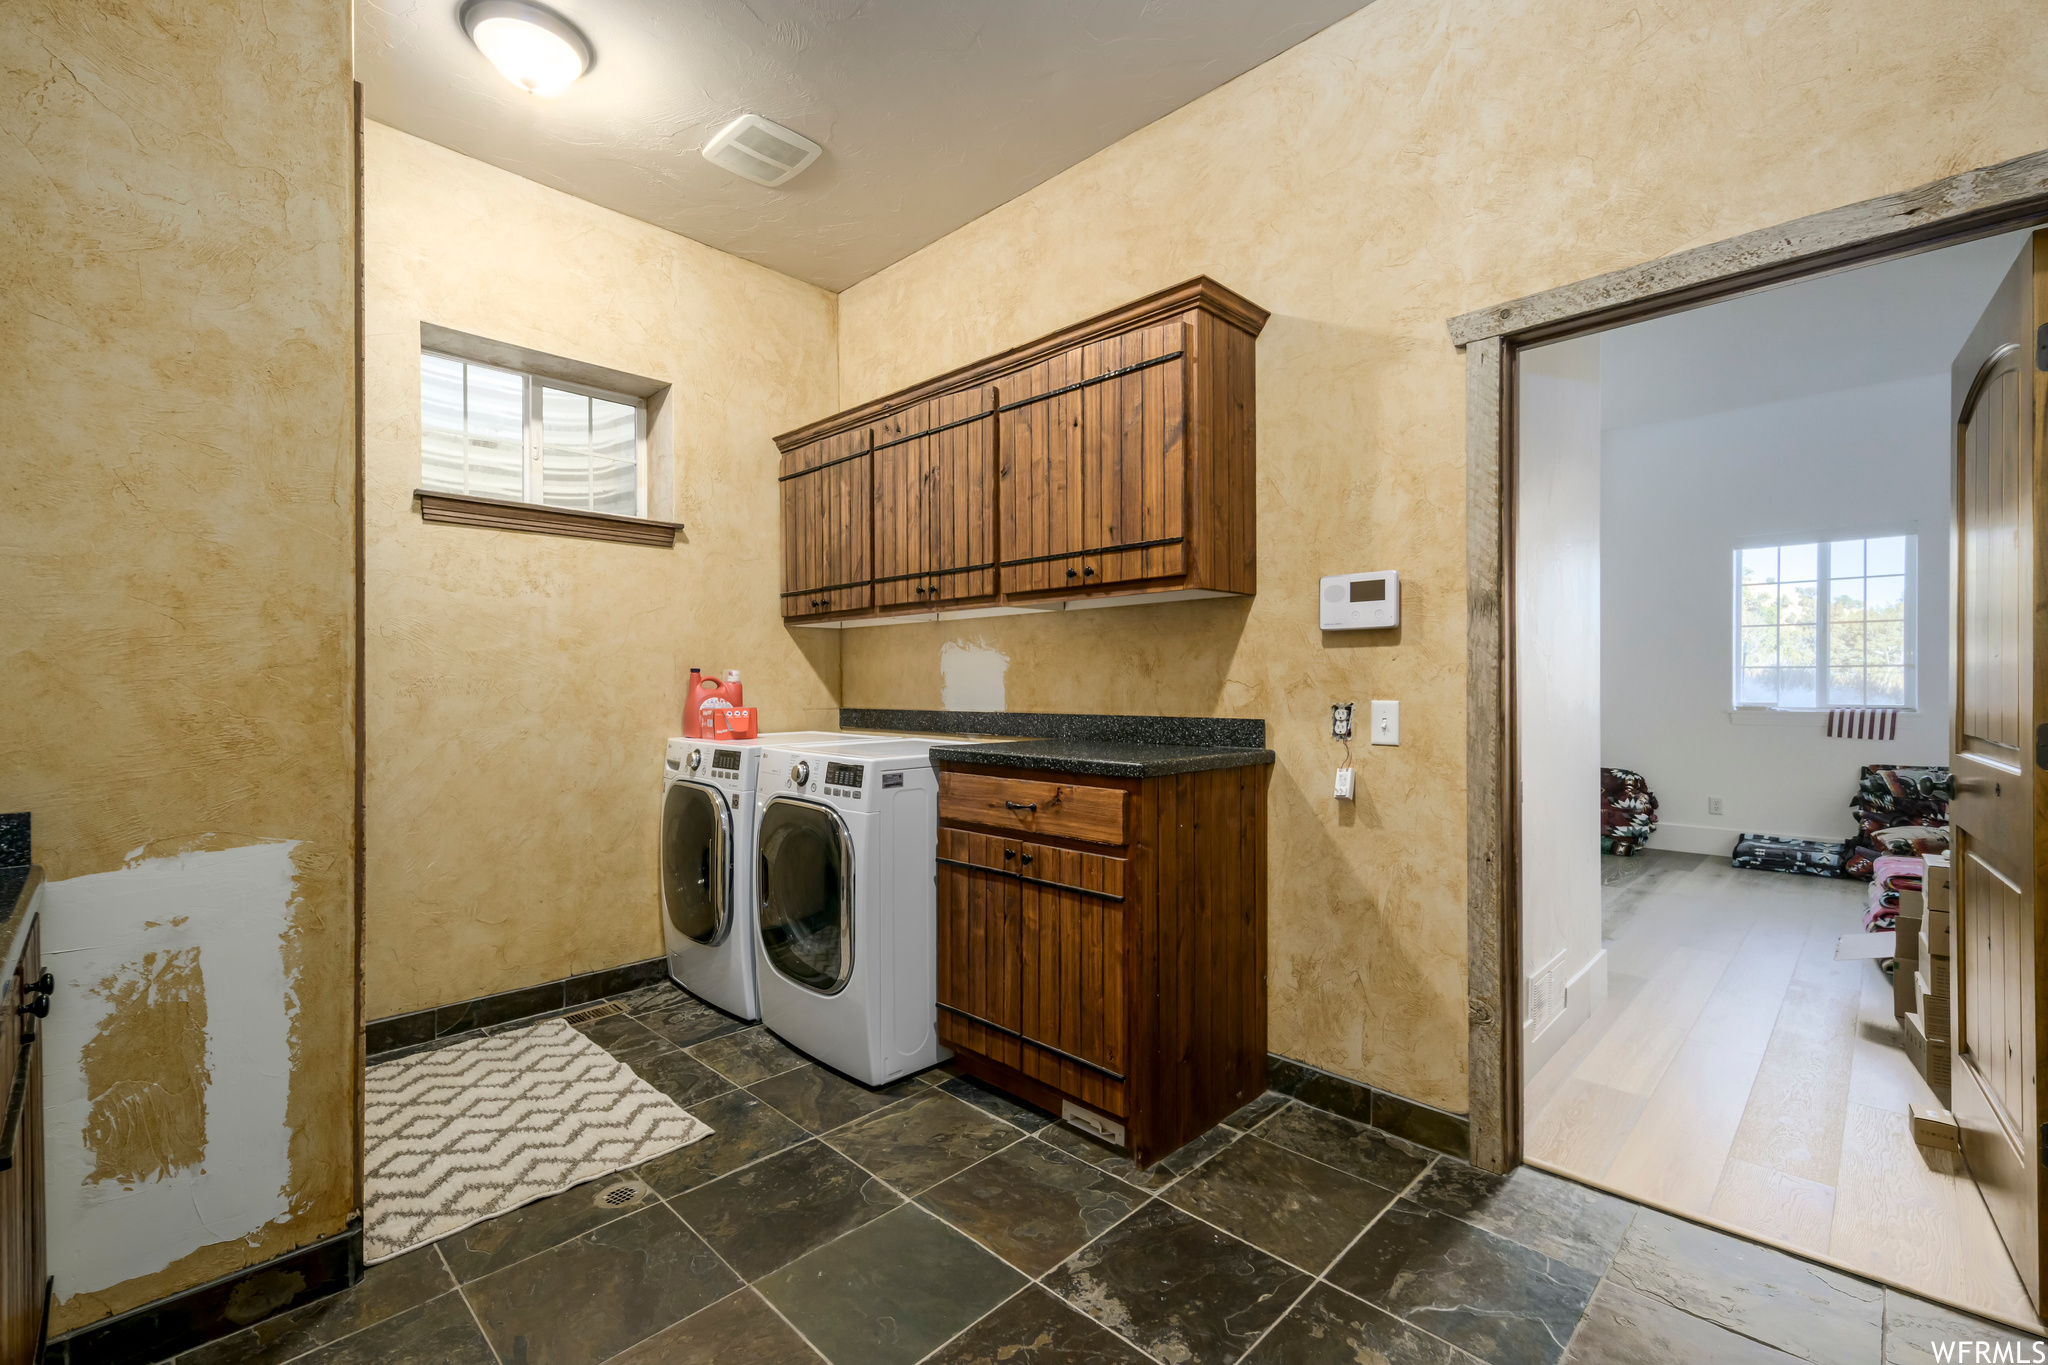 Laundry room featuring dark tile floors, independent washer and dryer, and cabinets